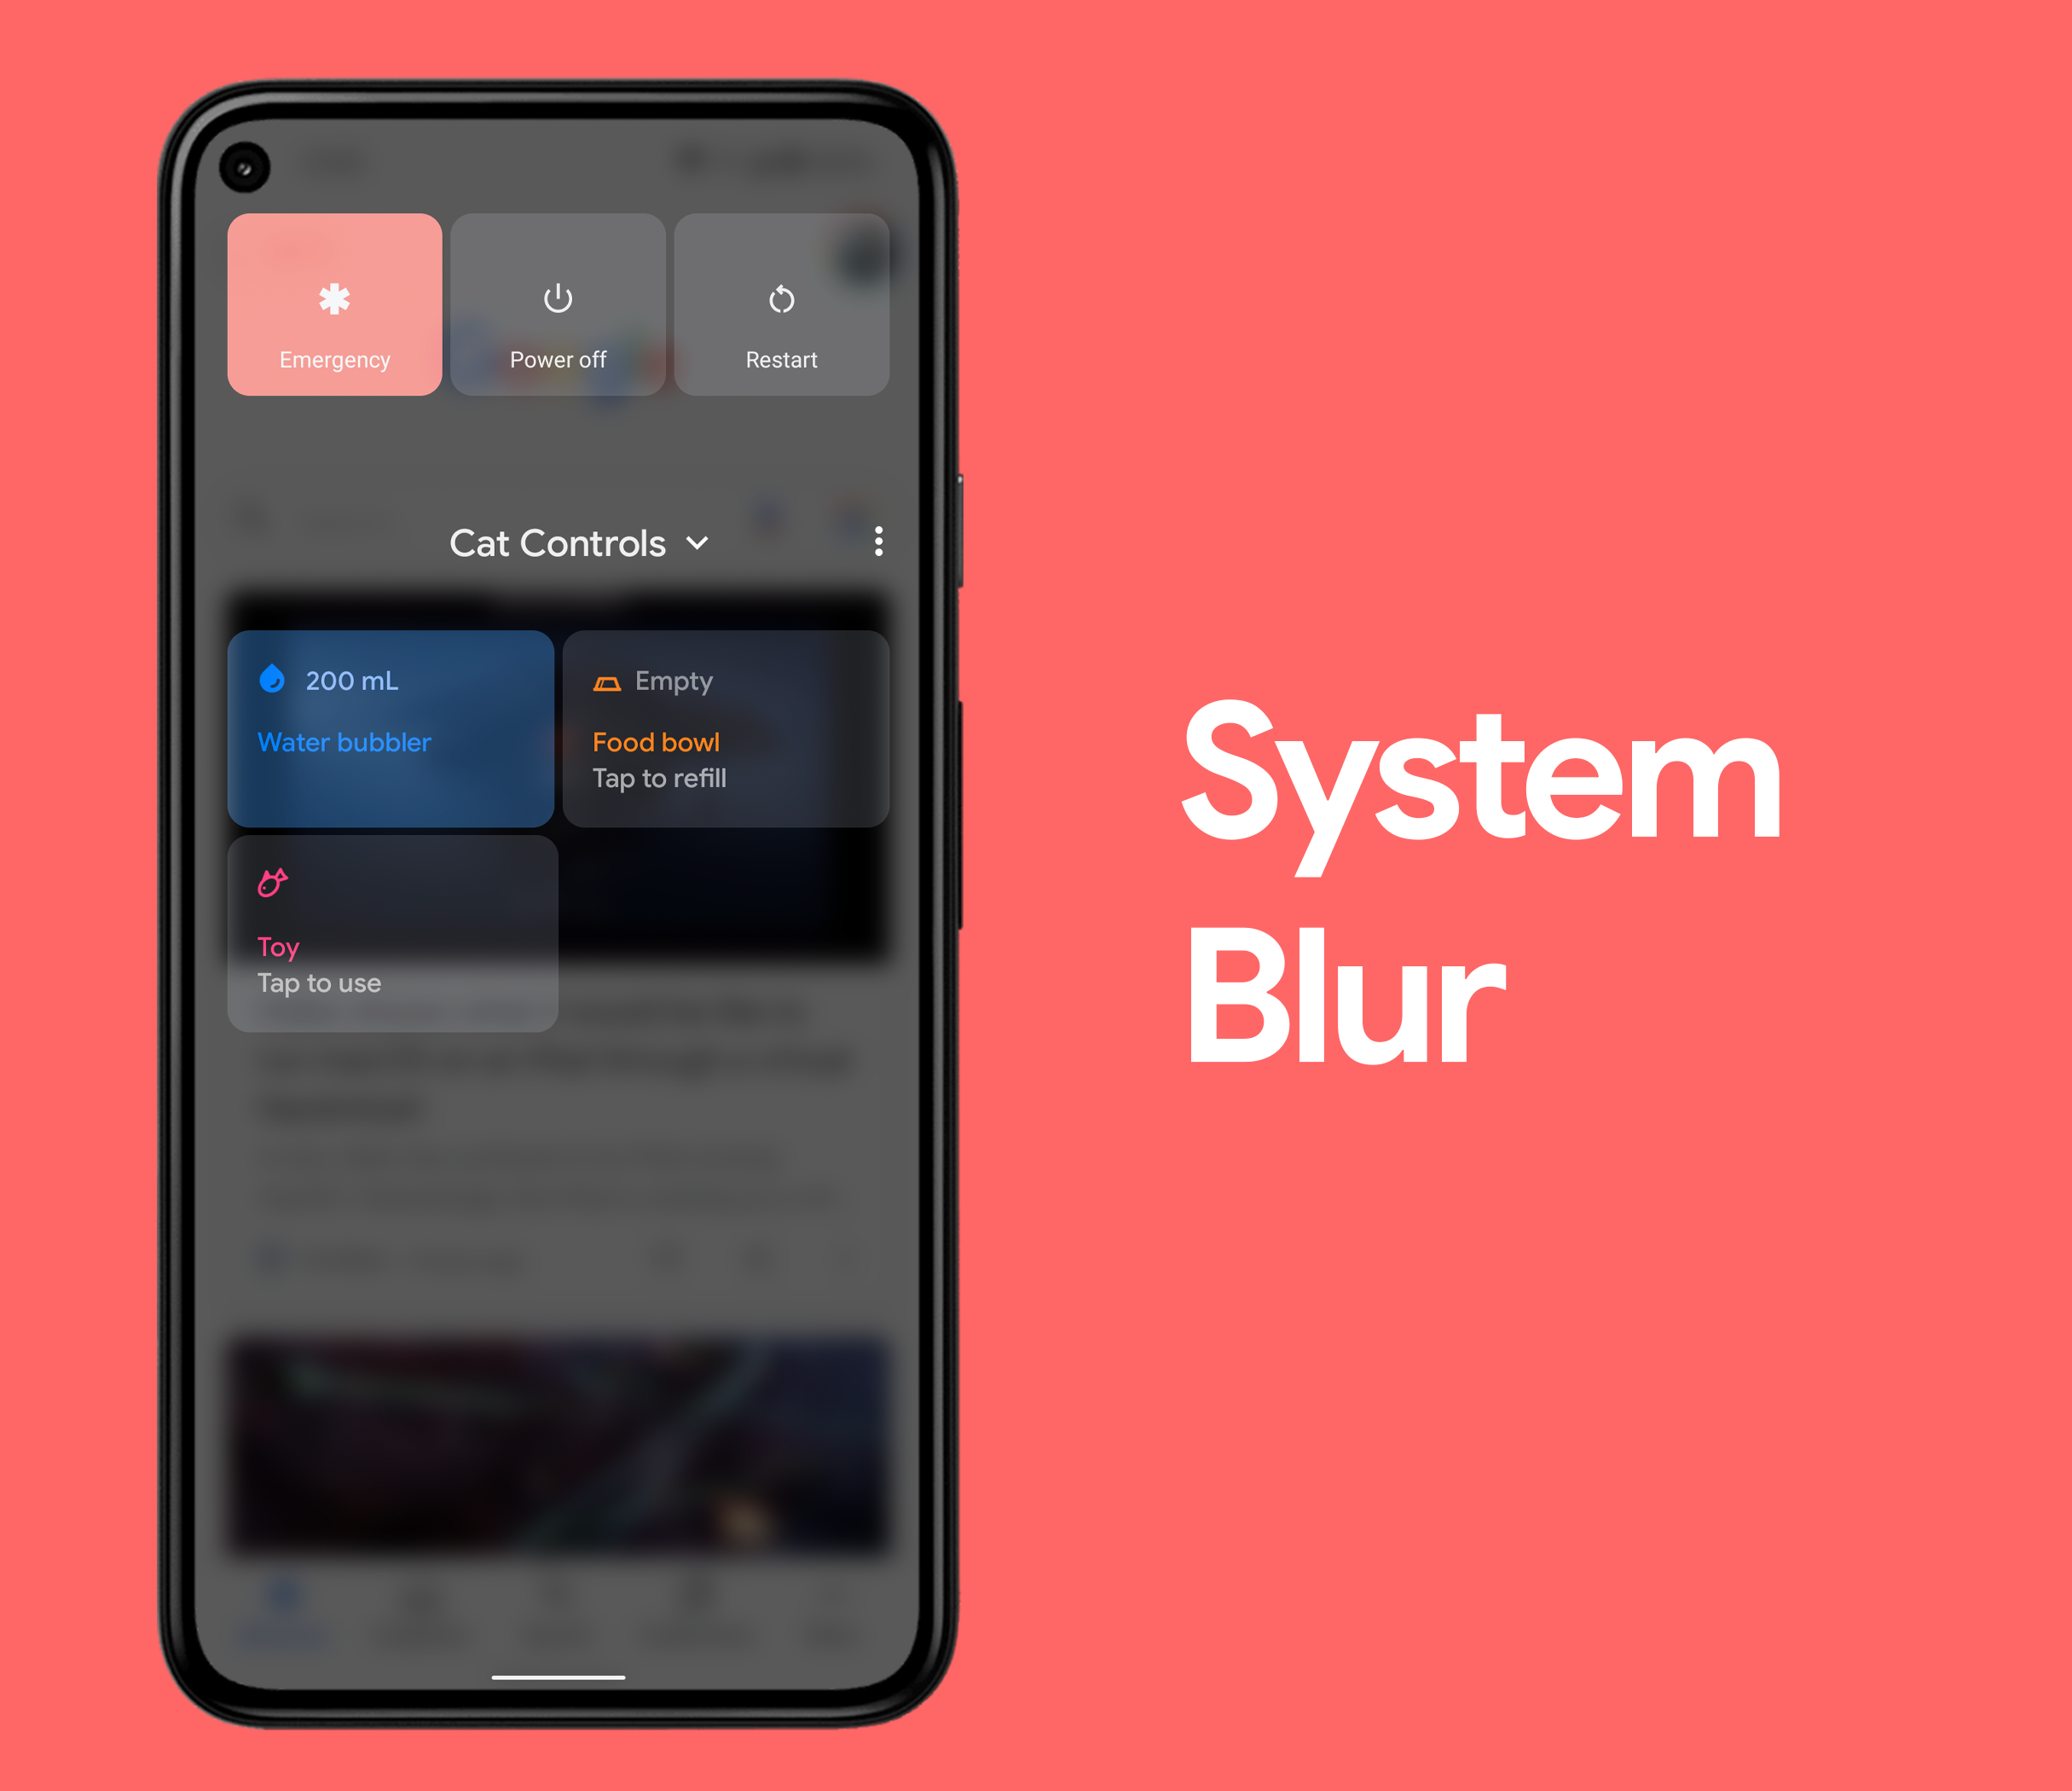 Detail Foto Blur Android Nomer 44